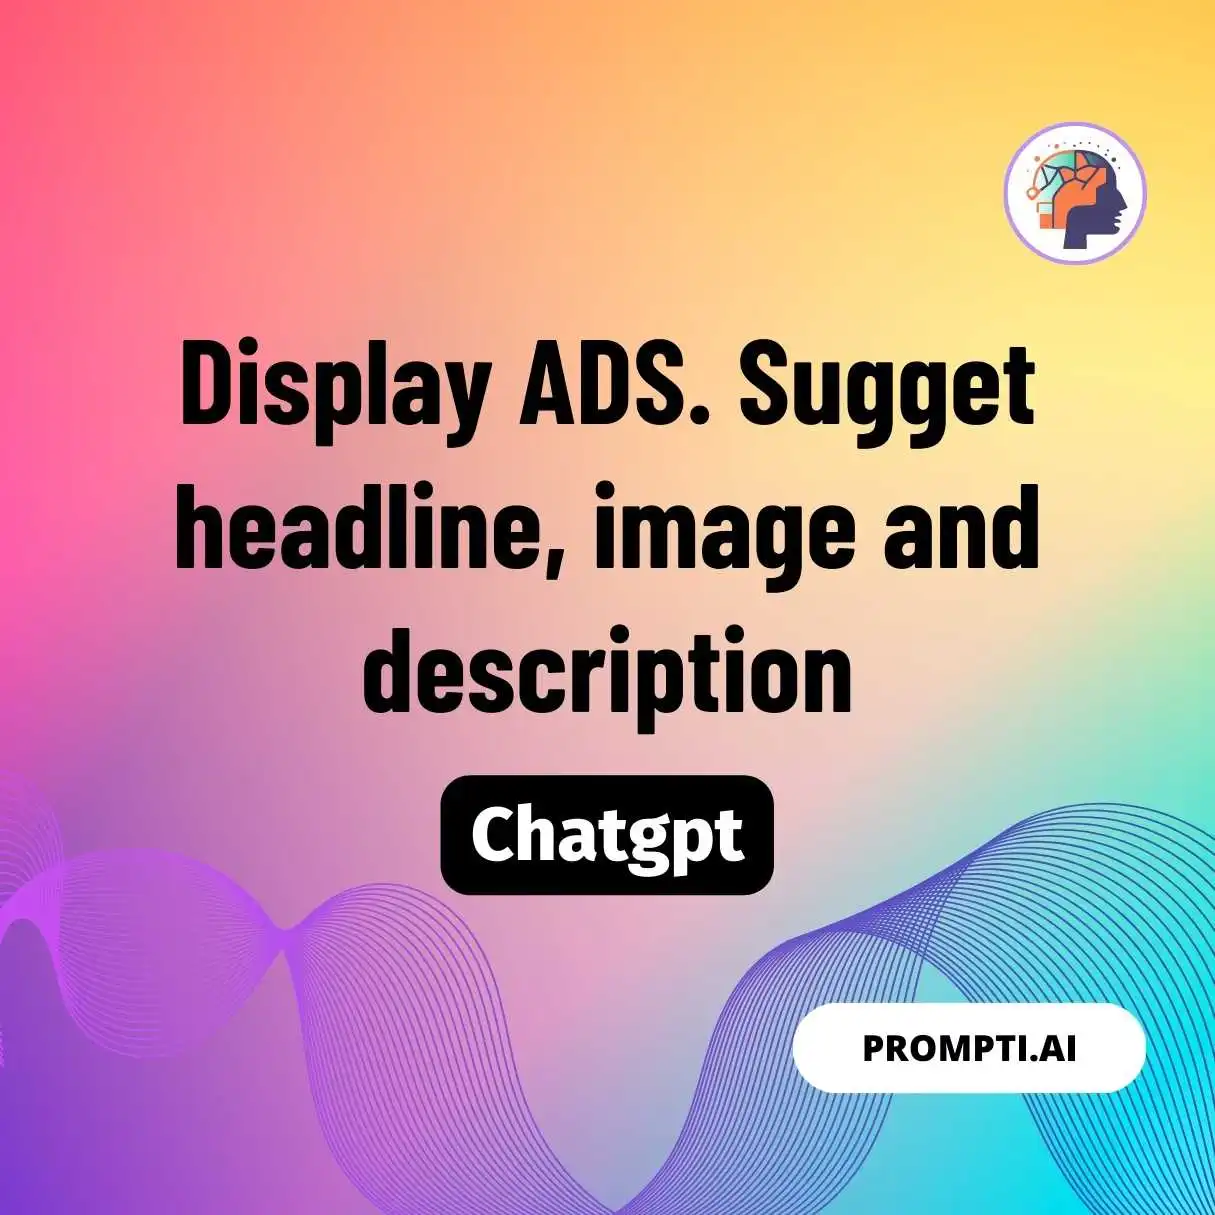 Display ADS. Sugget headline, image and description